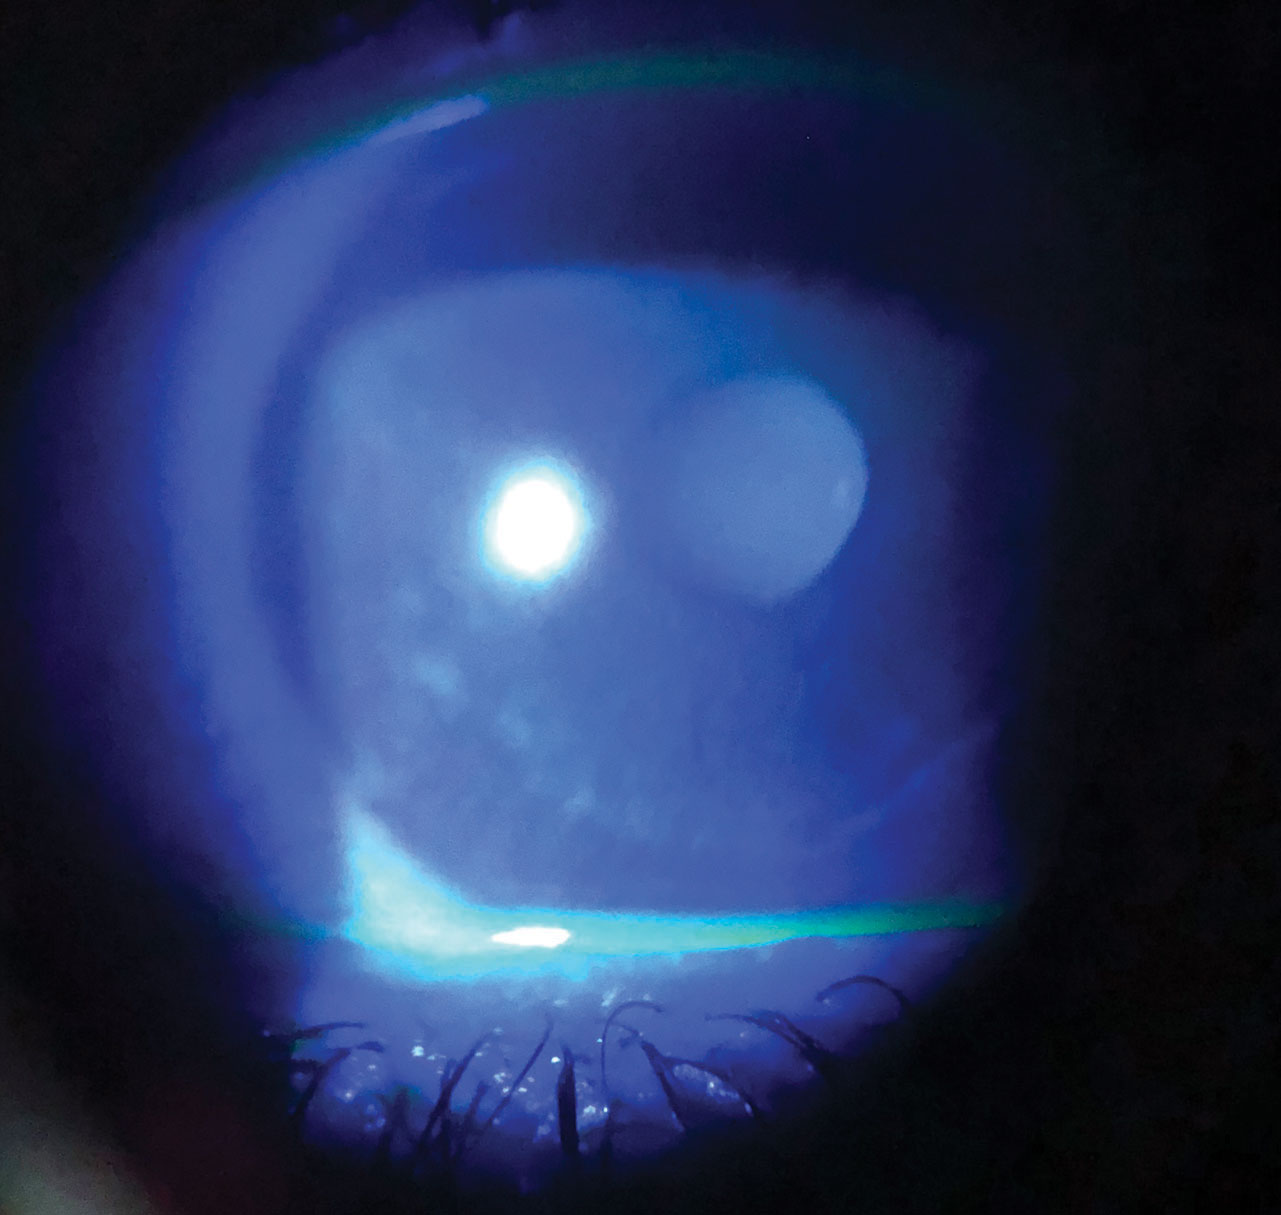 Dry eye in a patient with melanoma taking chemotherapeutic medications.